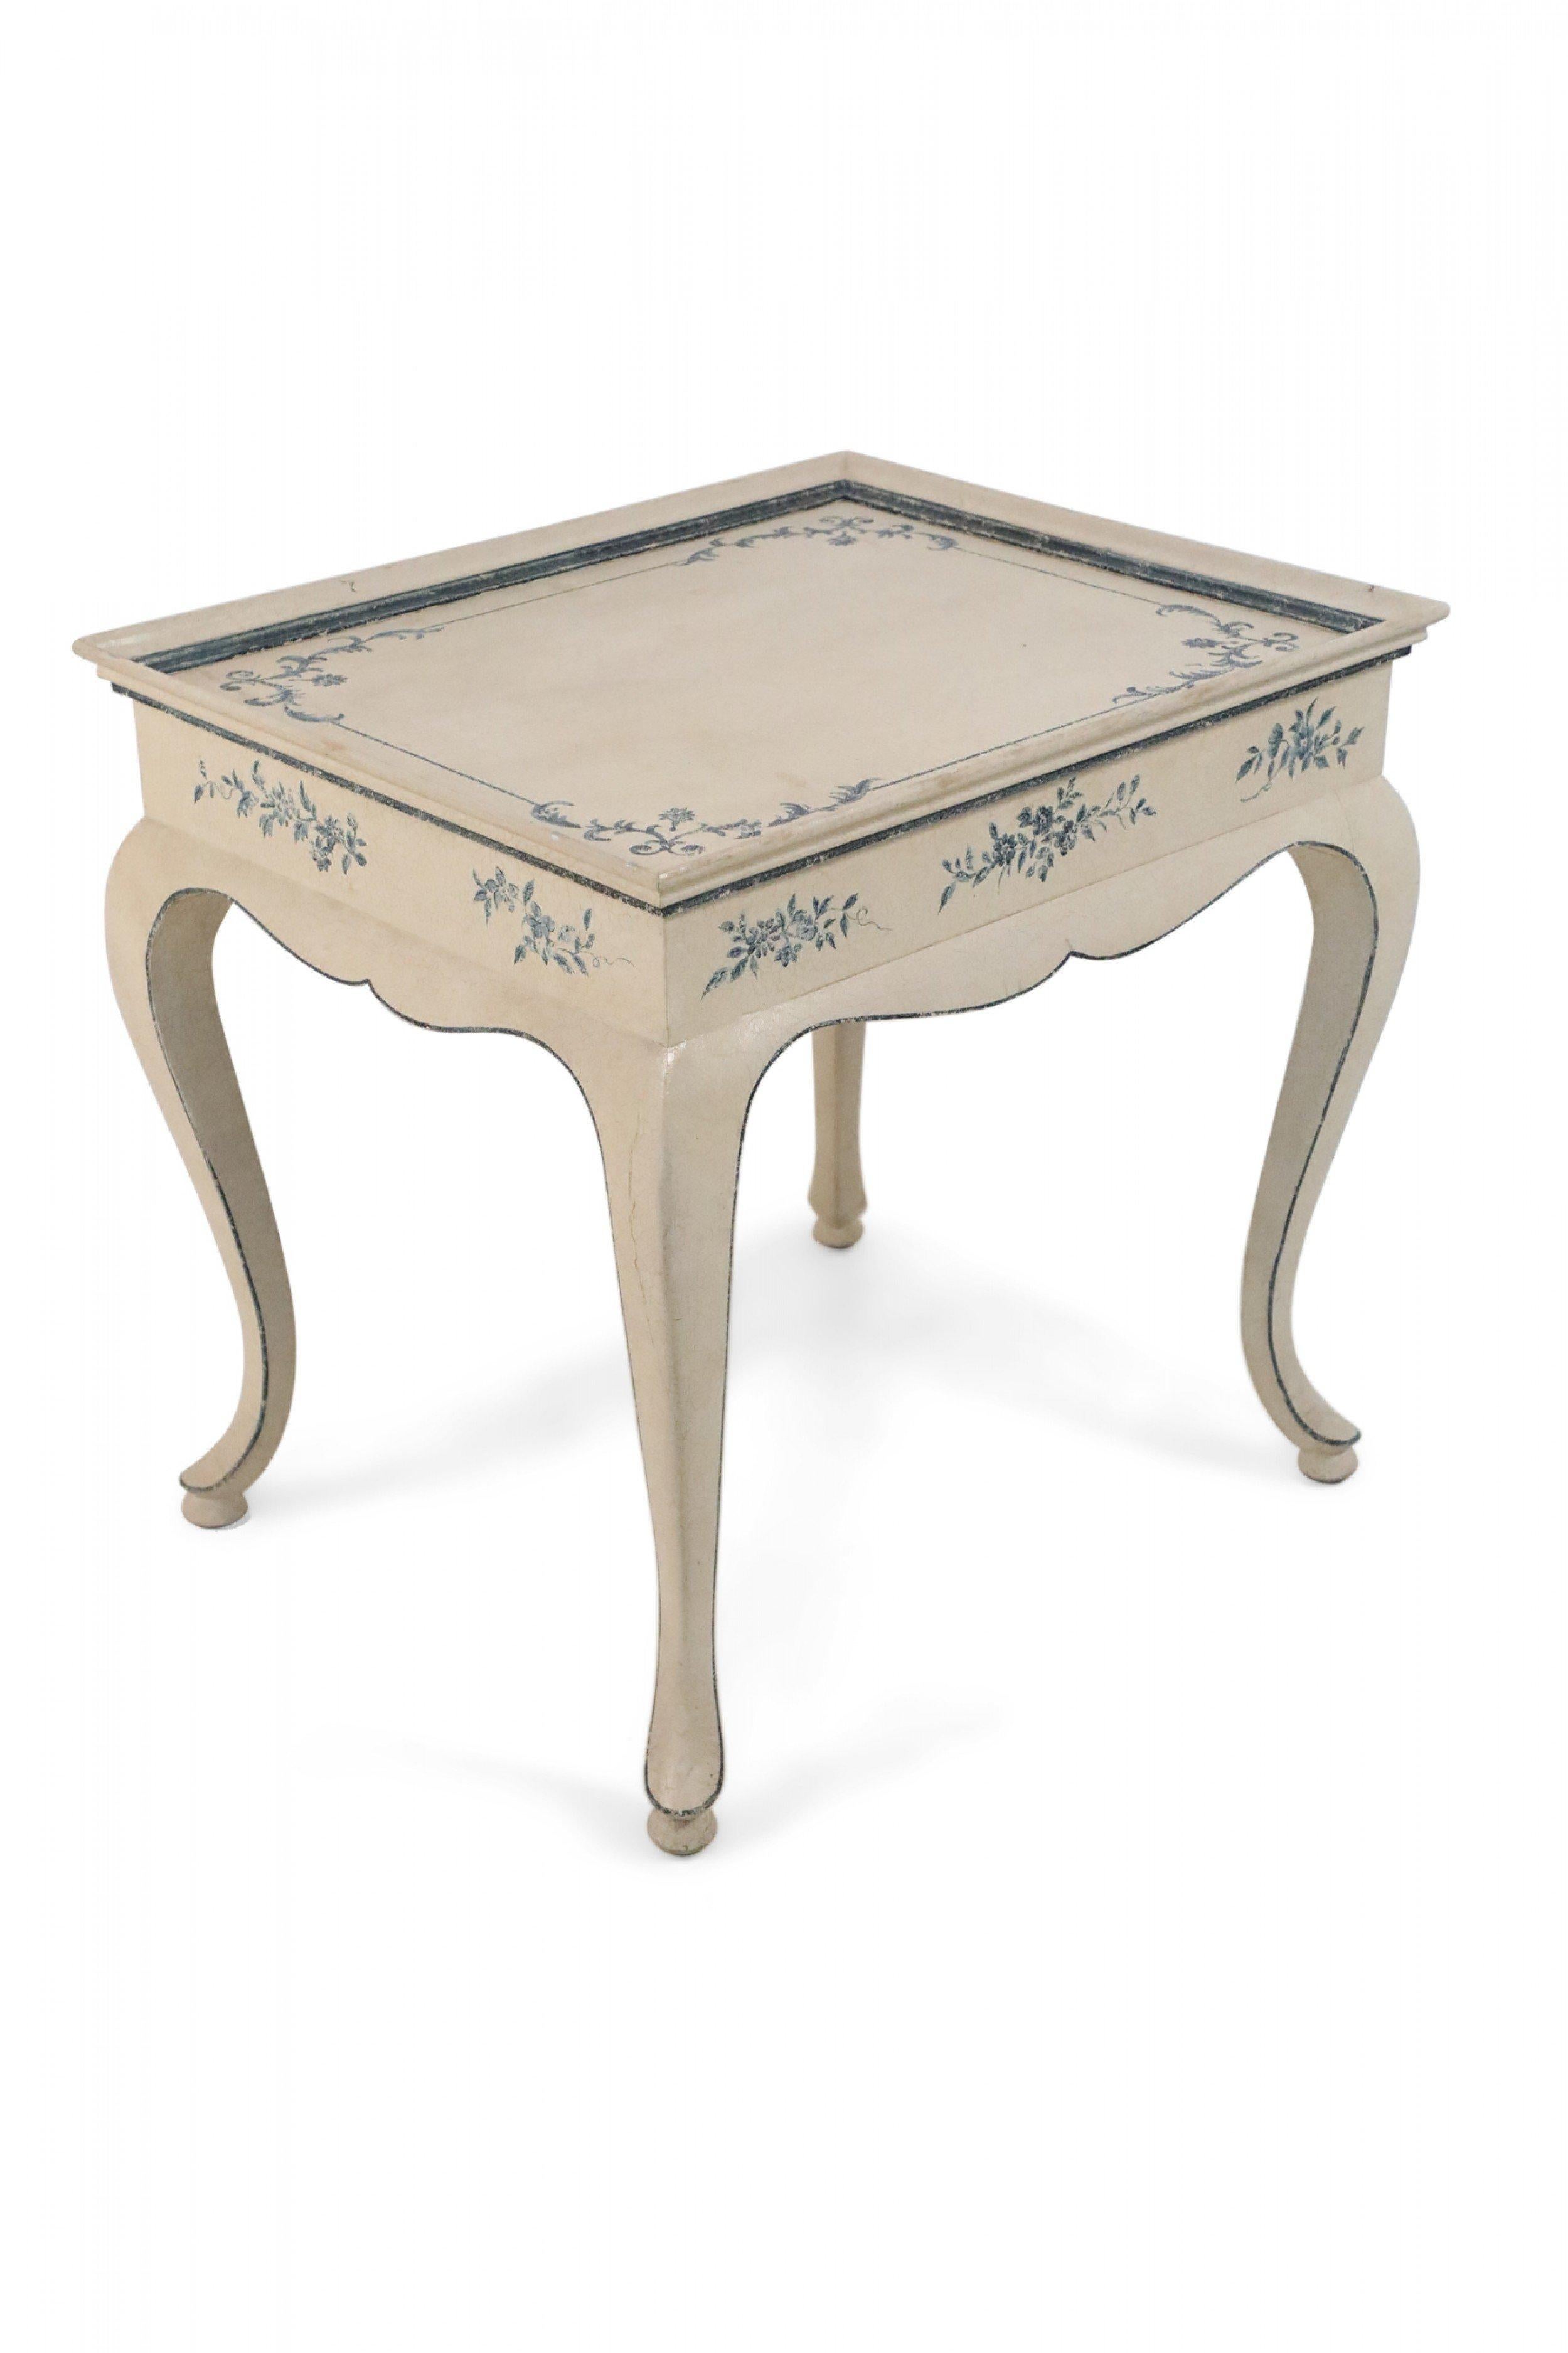 Painted French Provincial Style Cream Wooden Center Table For Sale